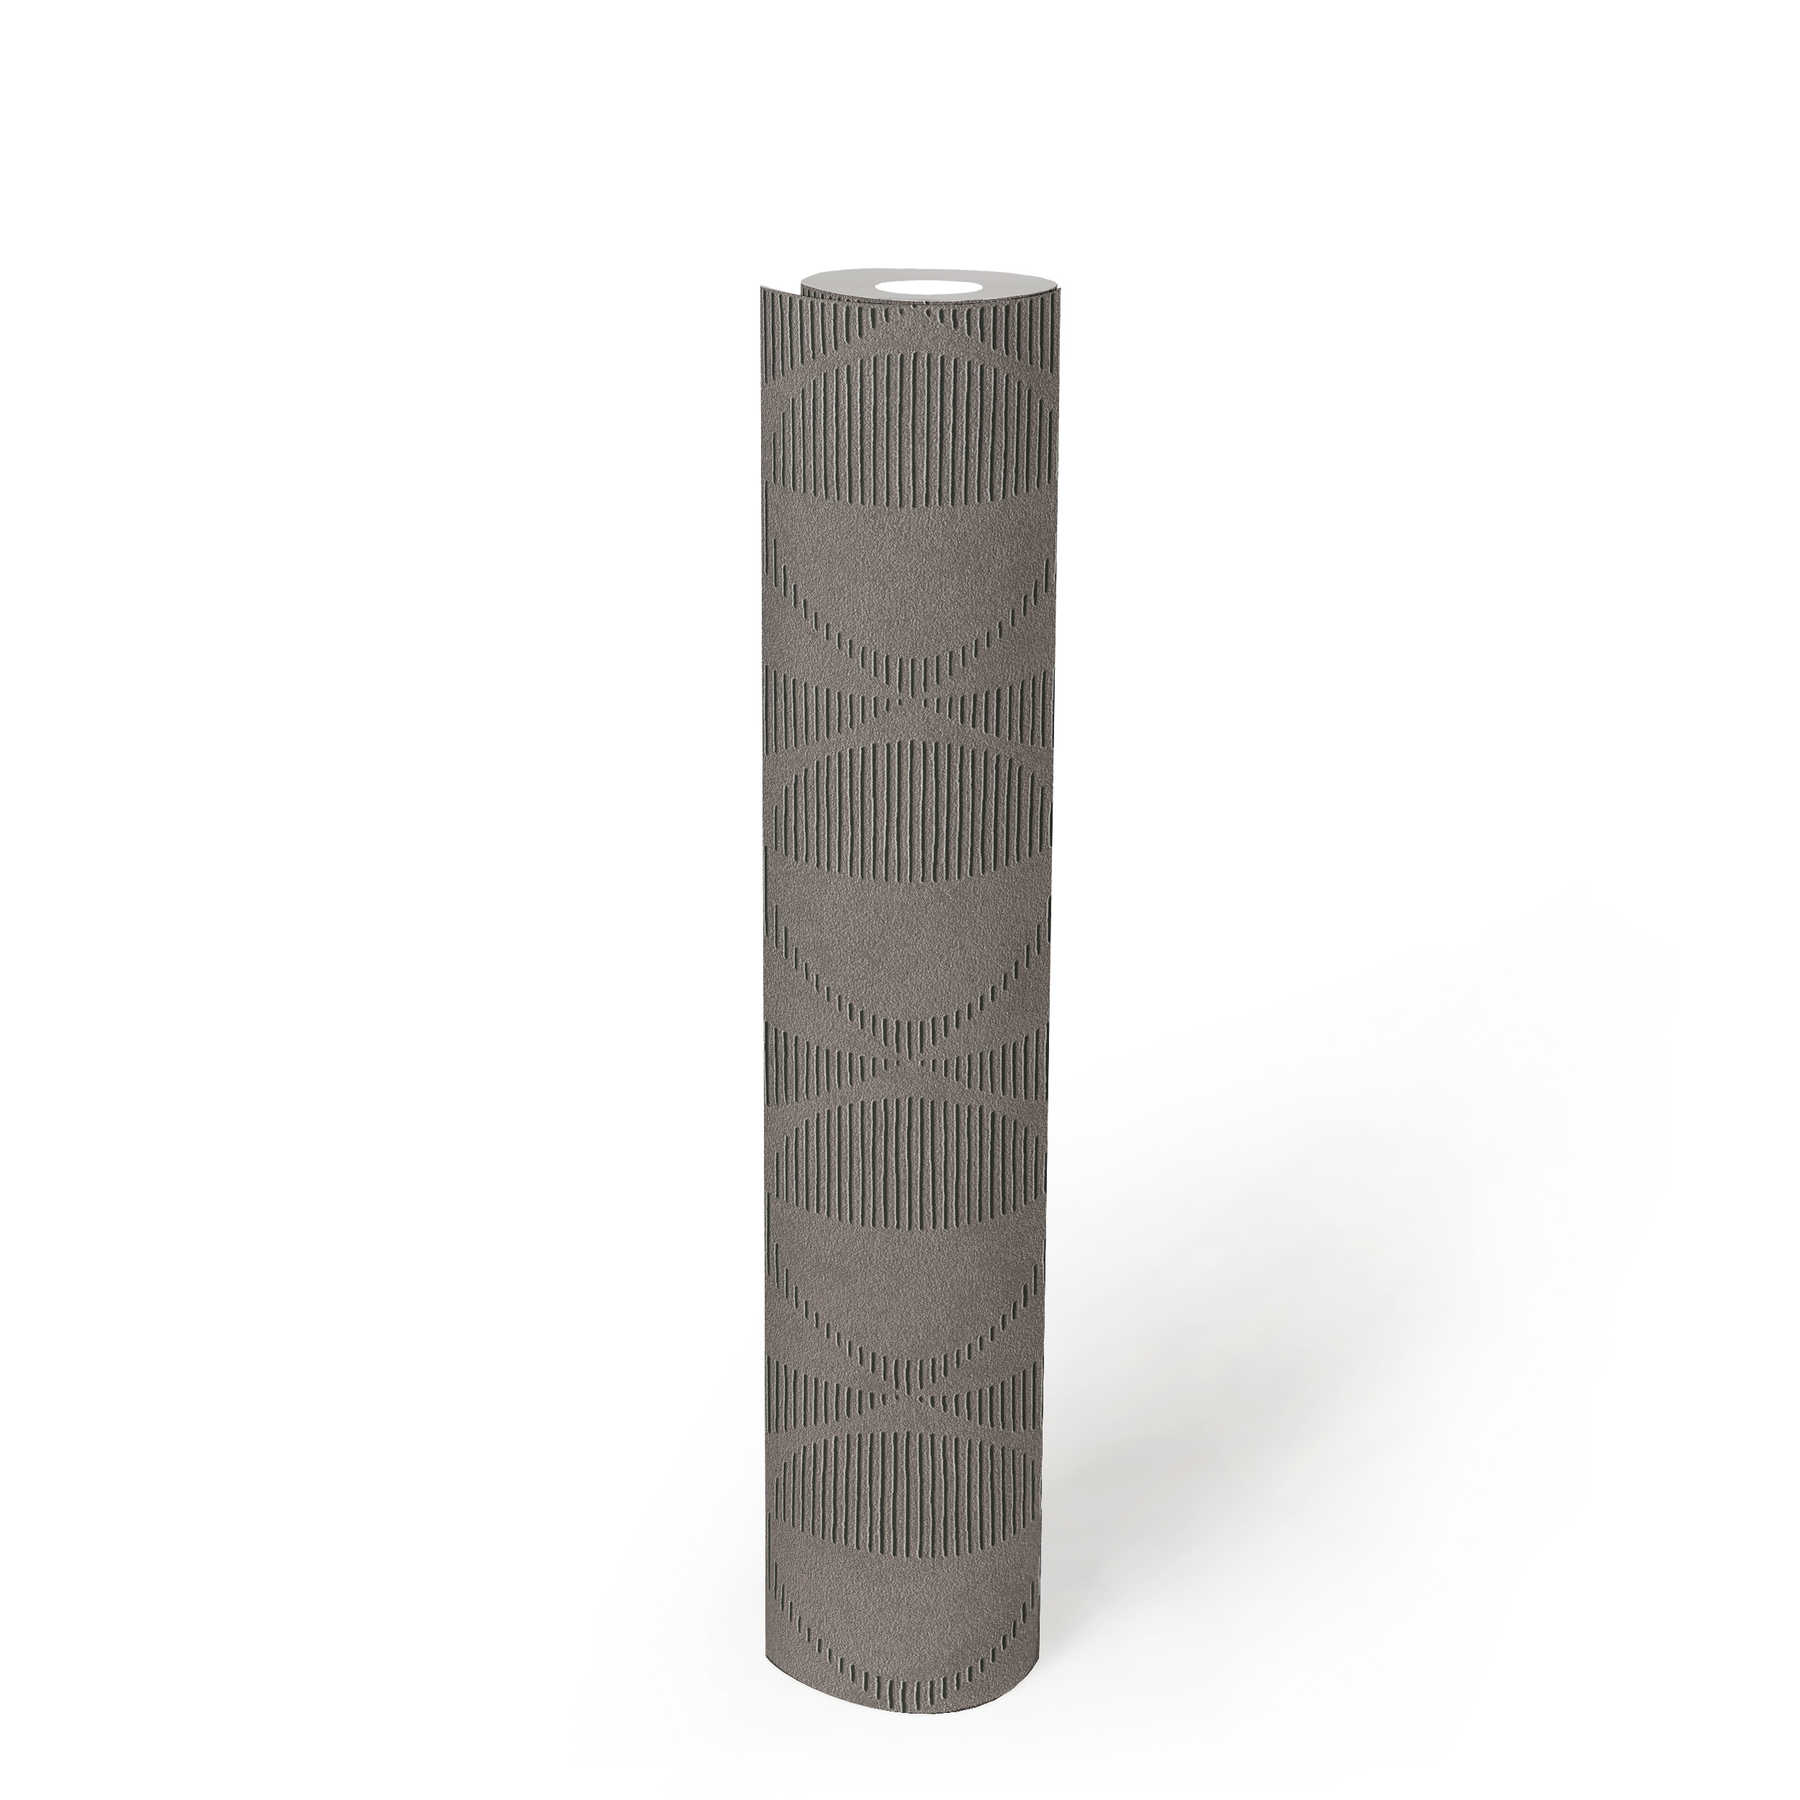             Retro wallpaper with circle and diamond pattern - grey, beige, black
        